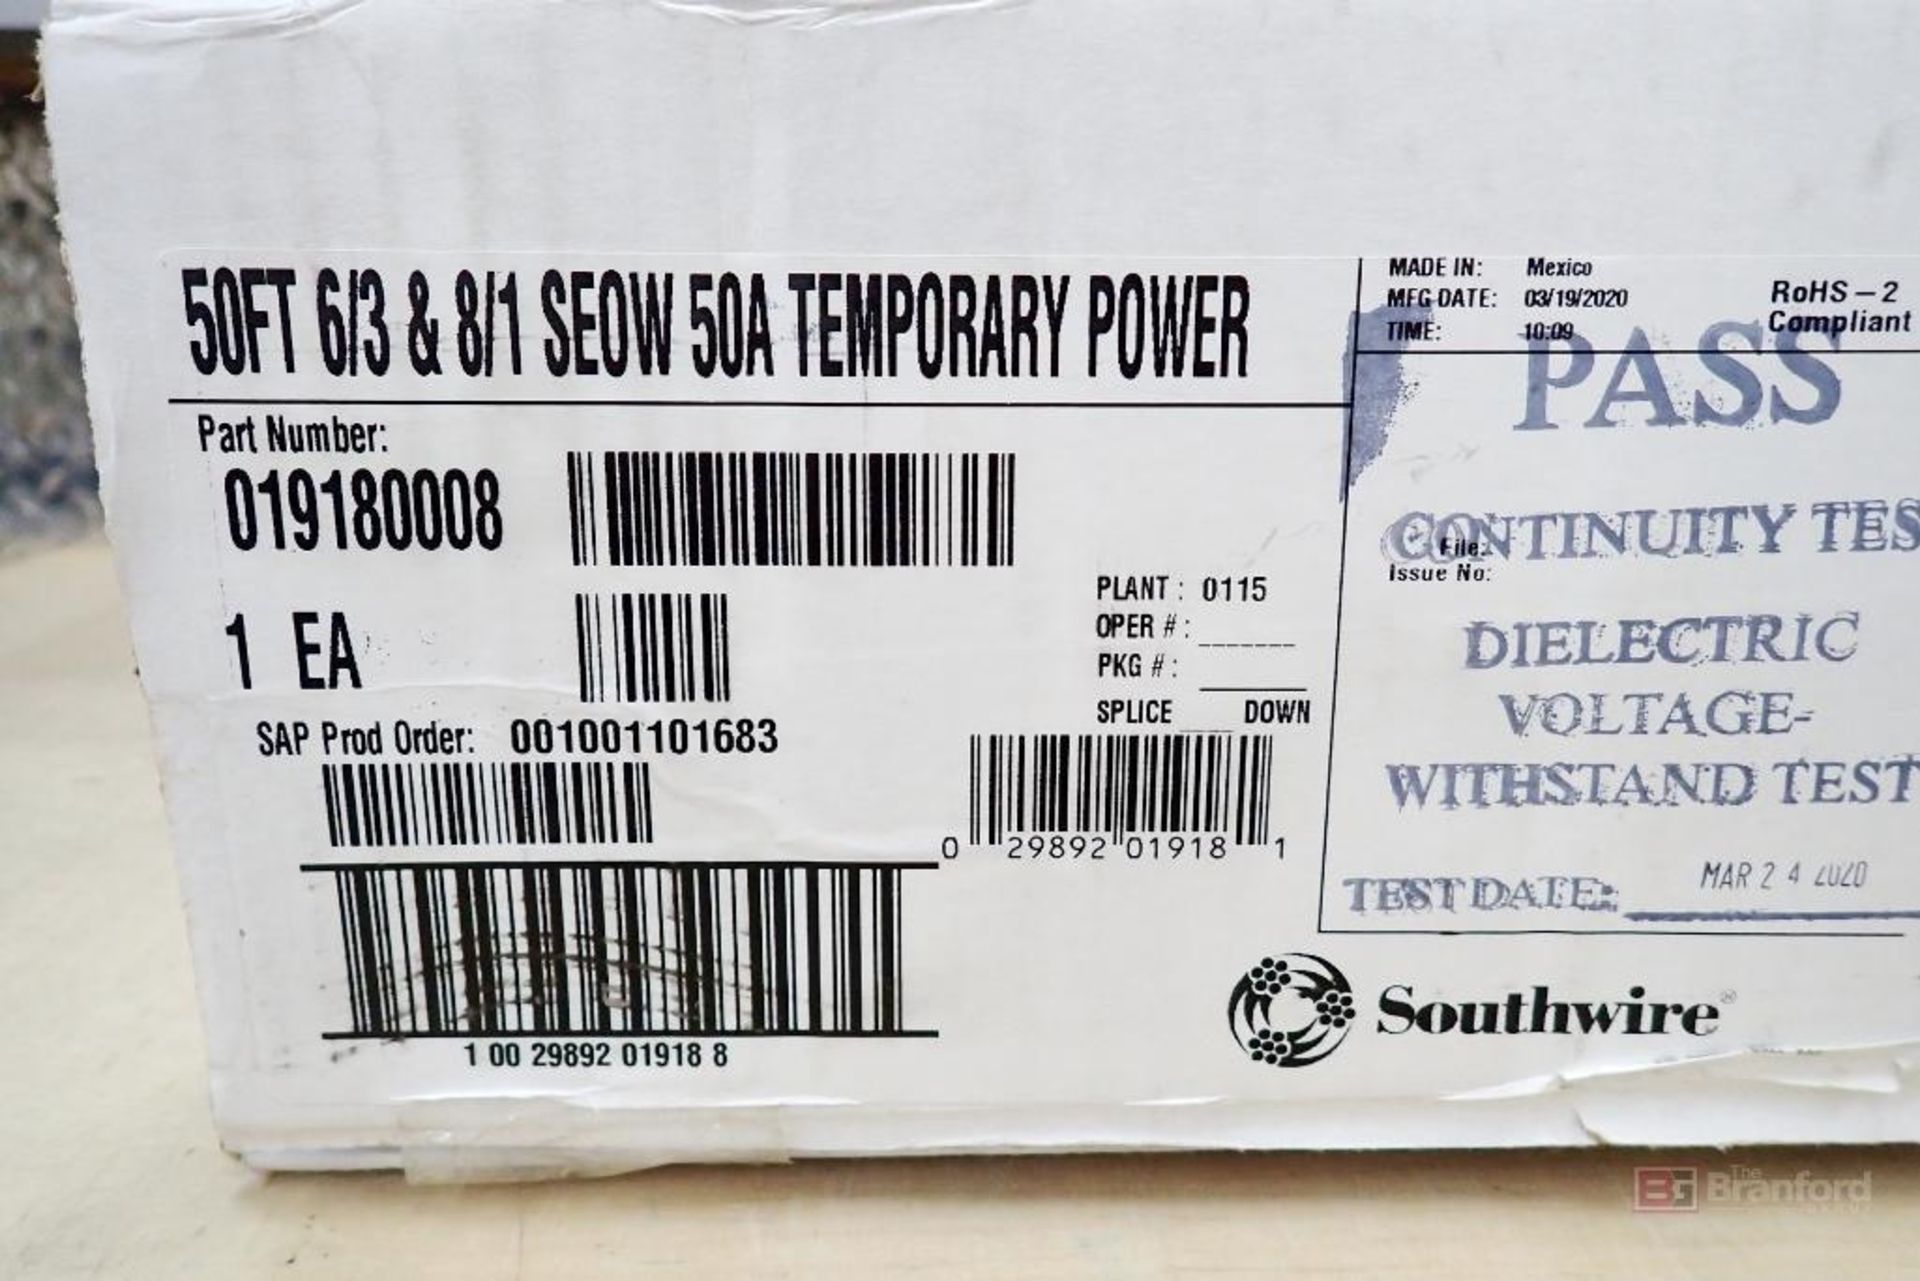 Southwire P/N 19180008 50Ft, 6/3 & 8/1 SEOW 50A Temporary Power Extension Cord - Image 2 of 5